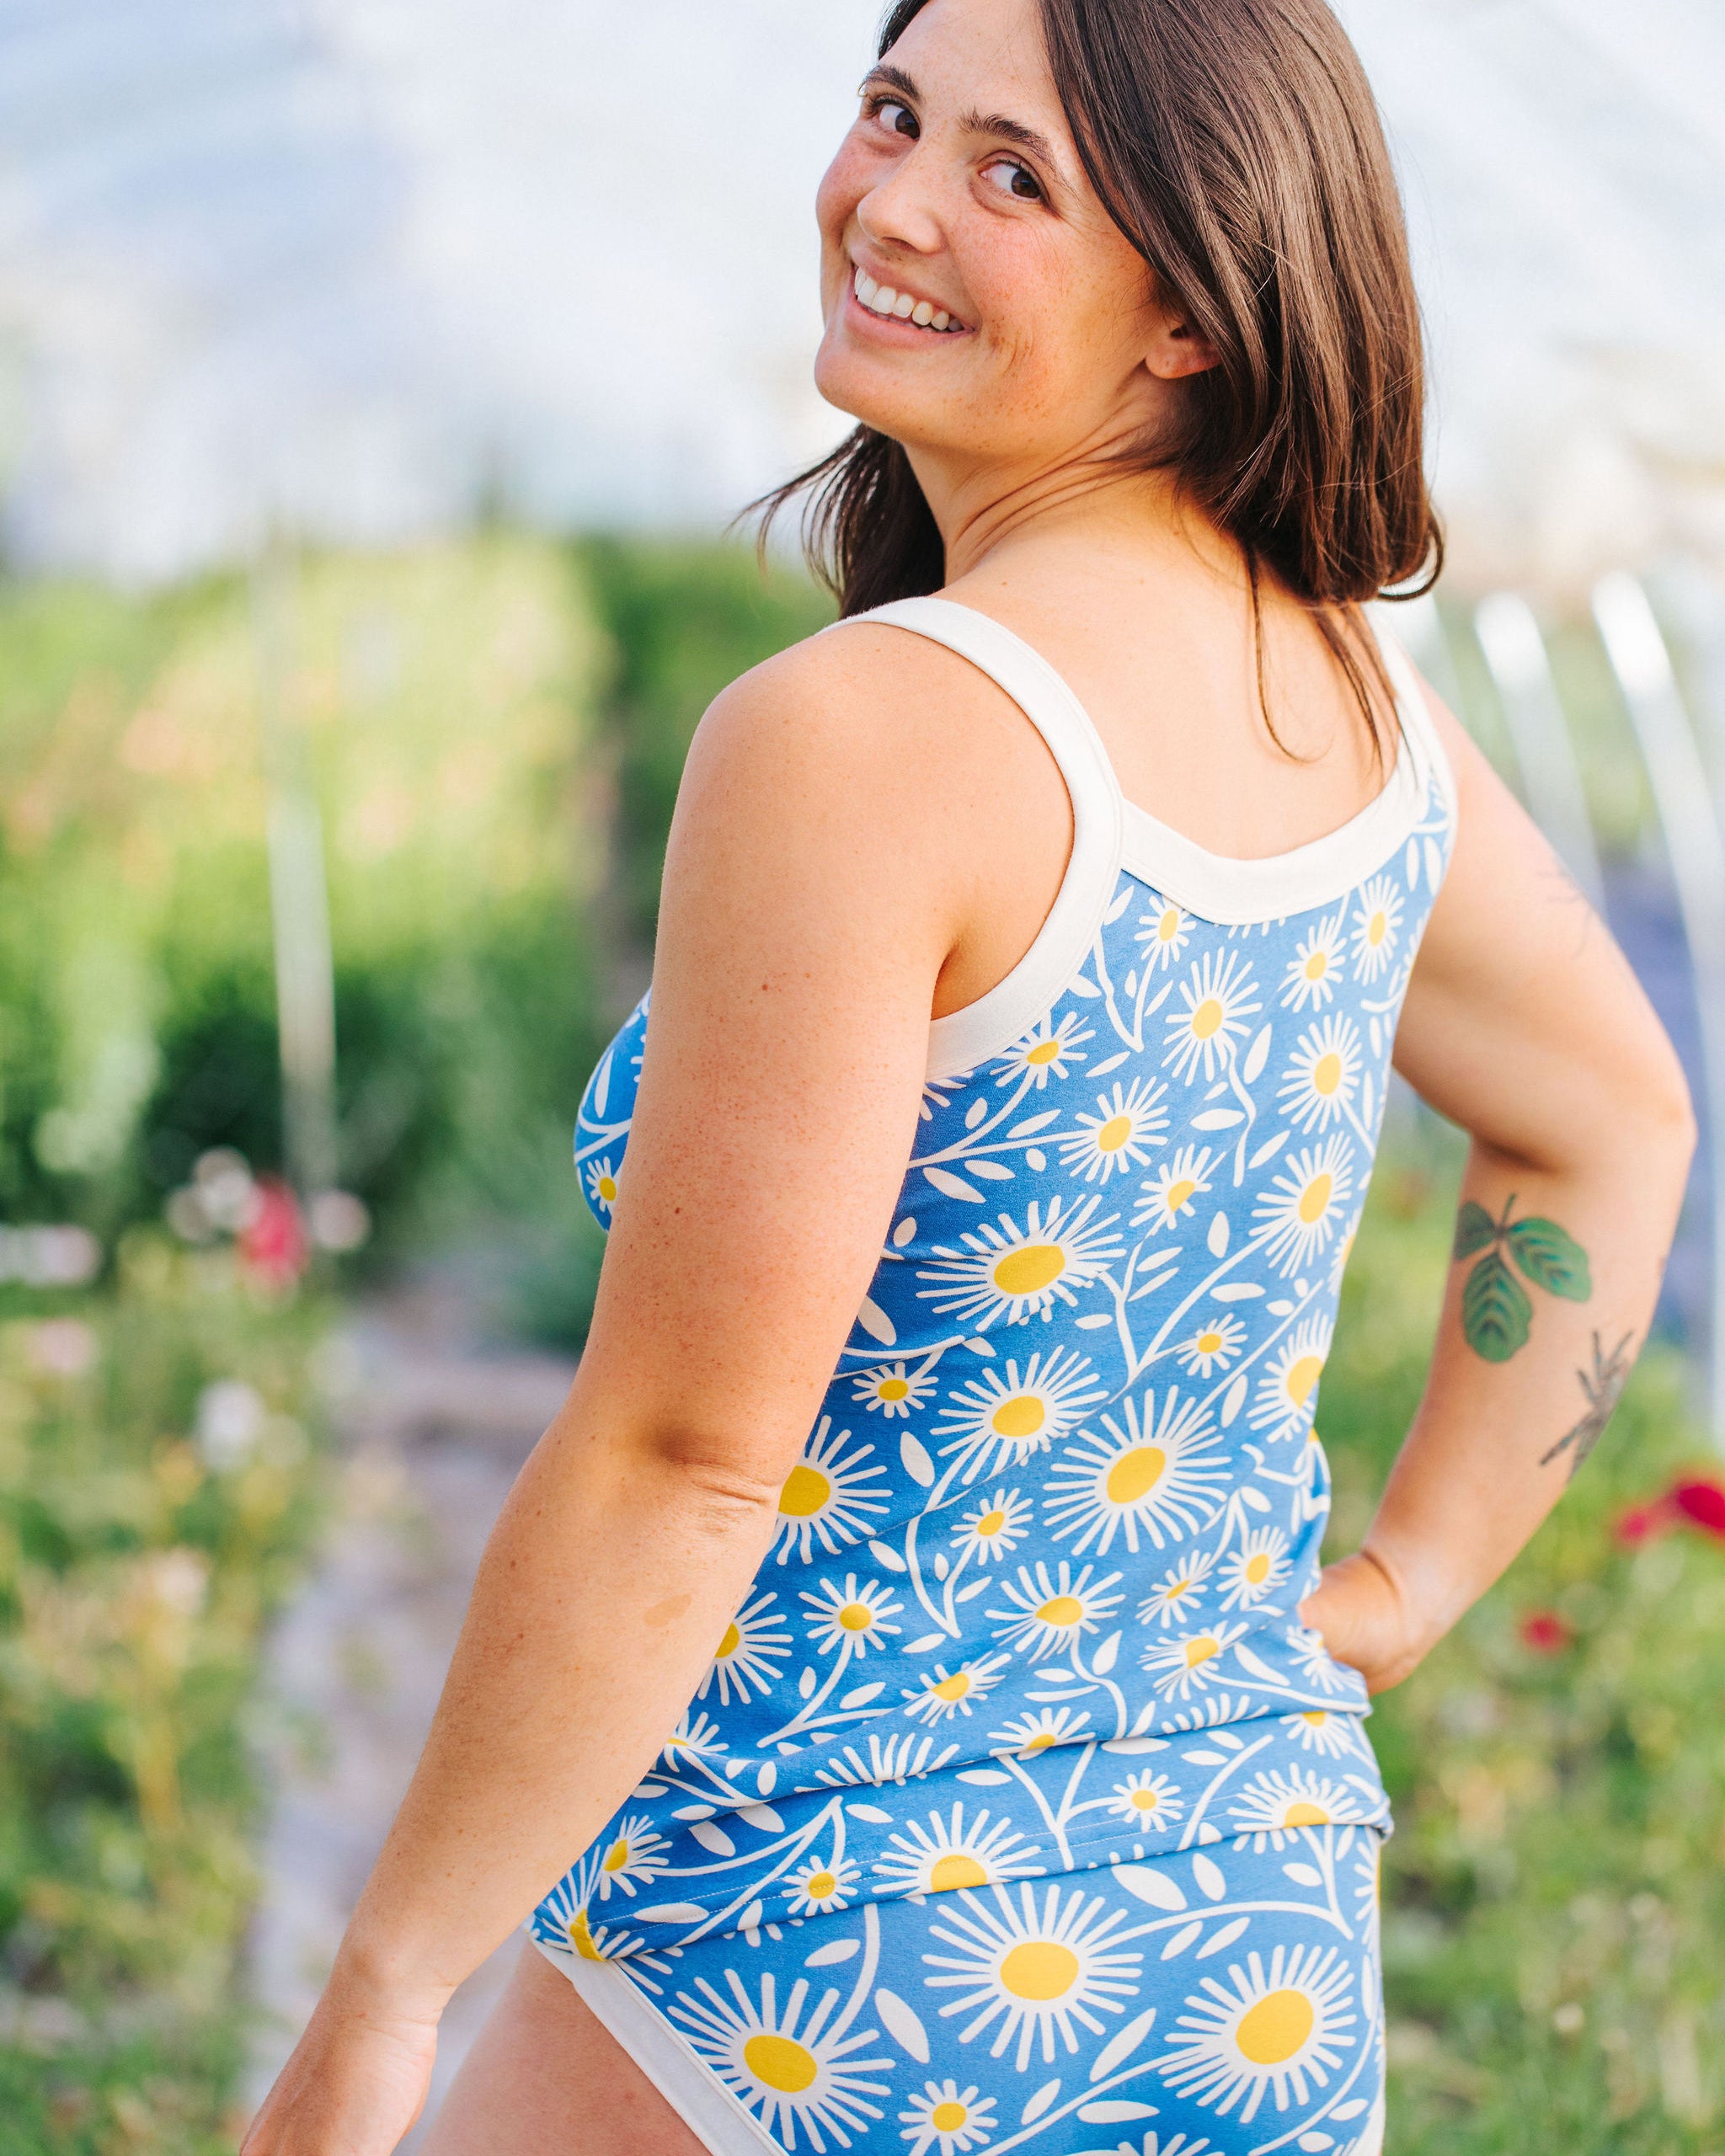 Close up of model smiling in a field wearing Thunderpants Camisole and Hipster style underwear in Daisy Days print: blue with white and yellow daisies.